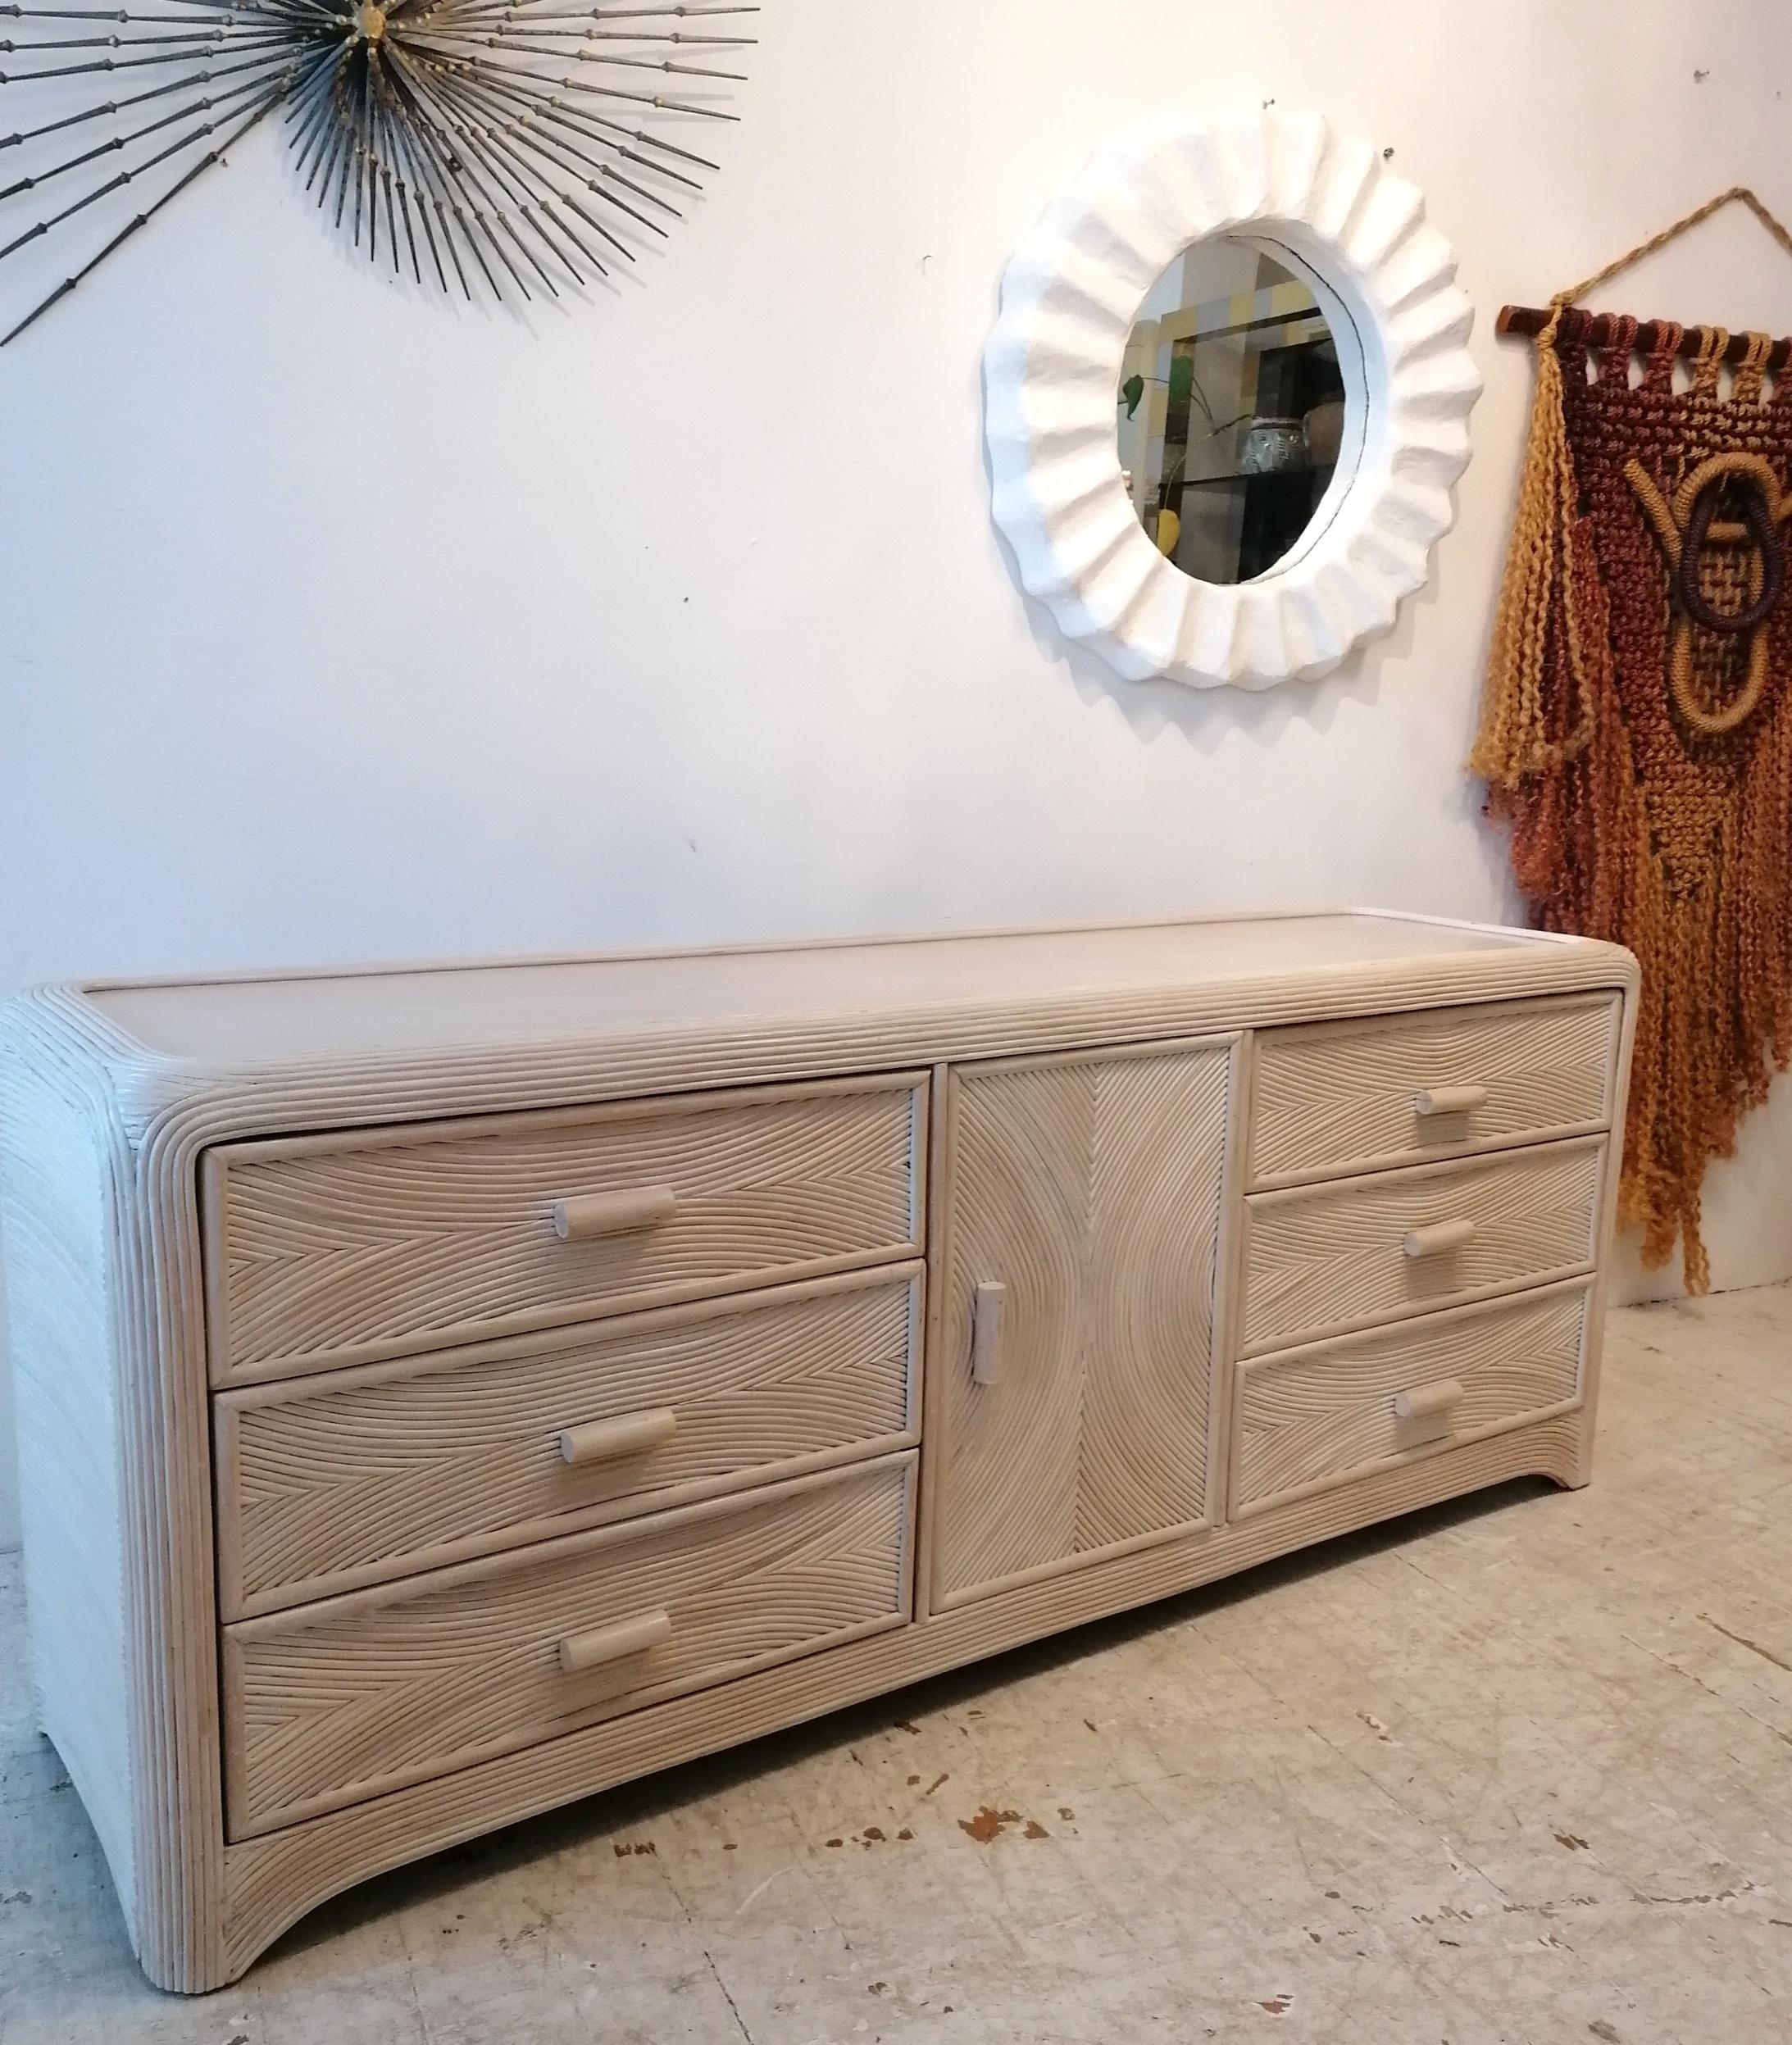 Vintage American cream pencil reed / cane sideboard with drawers c1970s 2